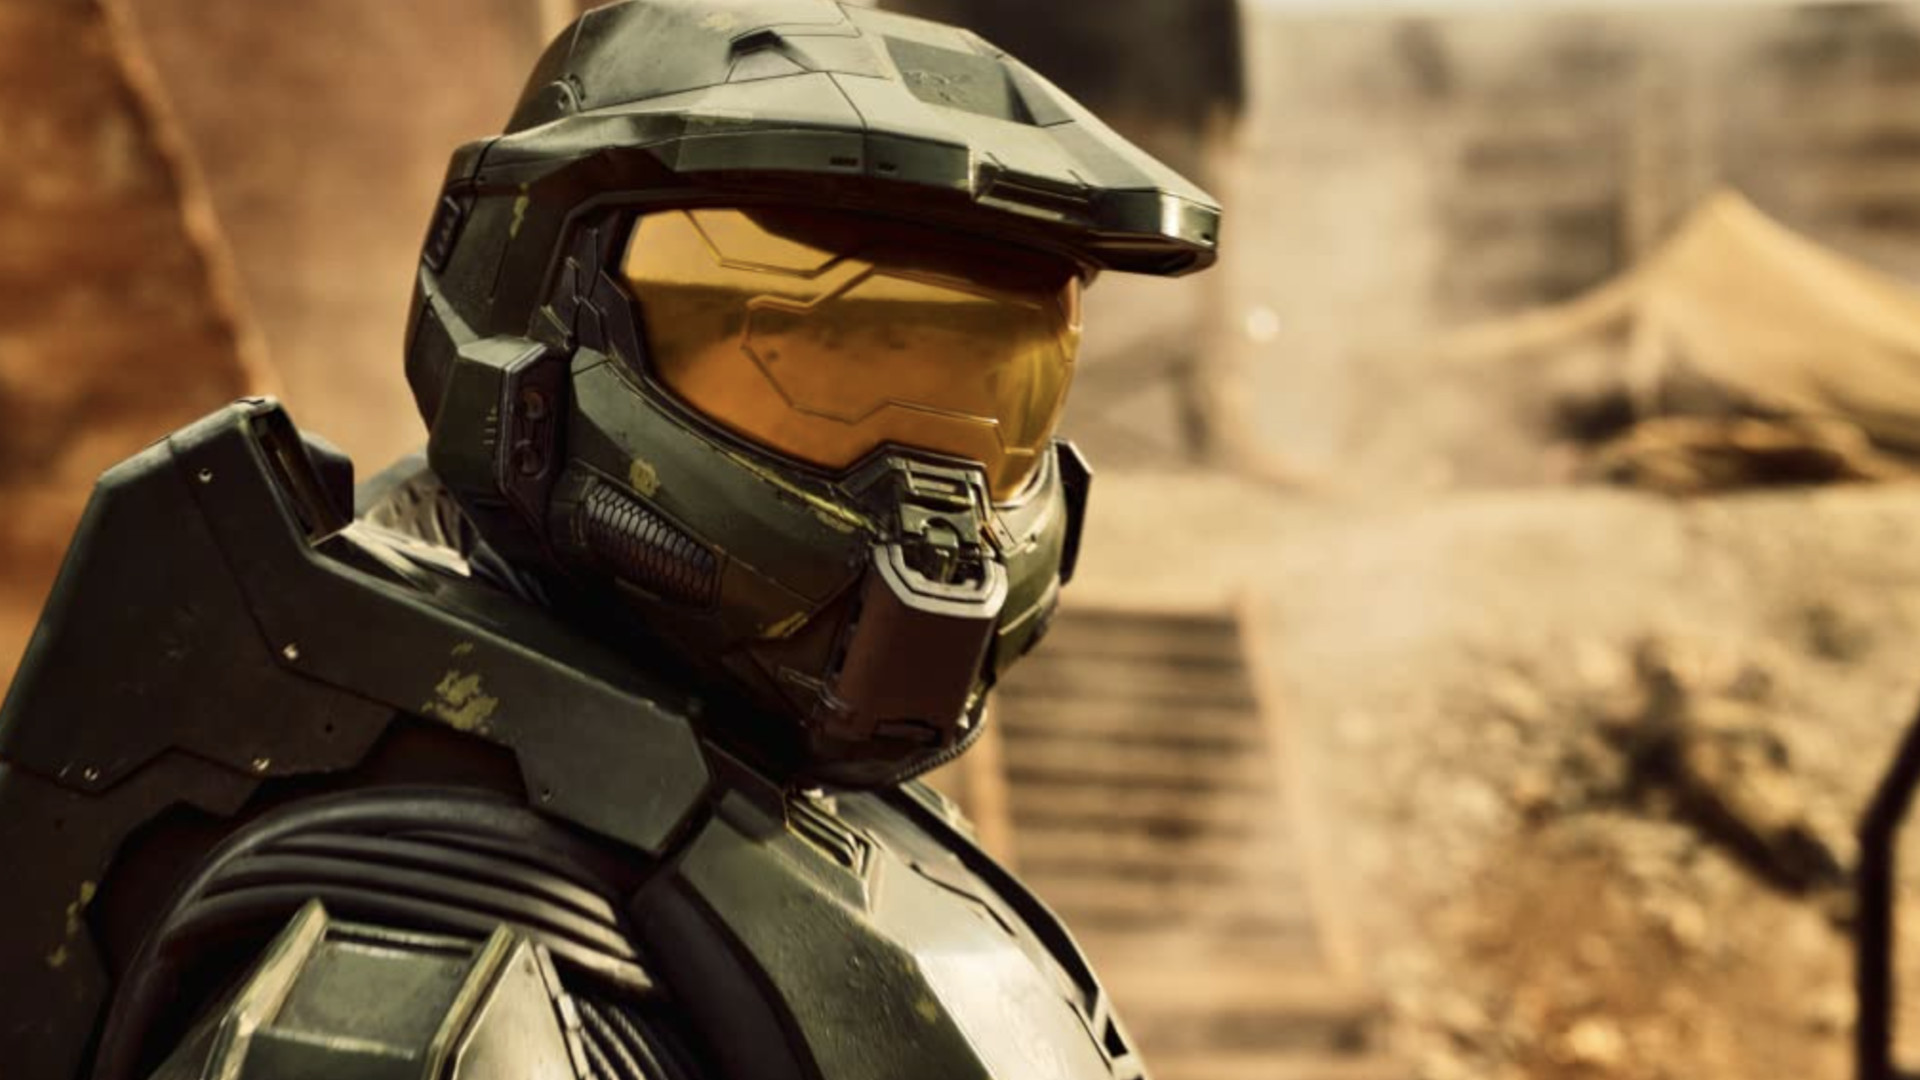 How to watch Halo TV series in the UK